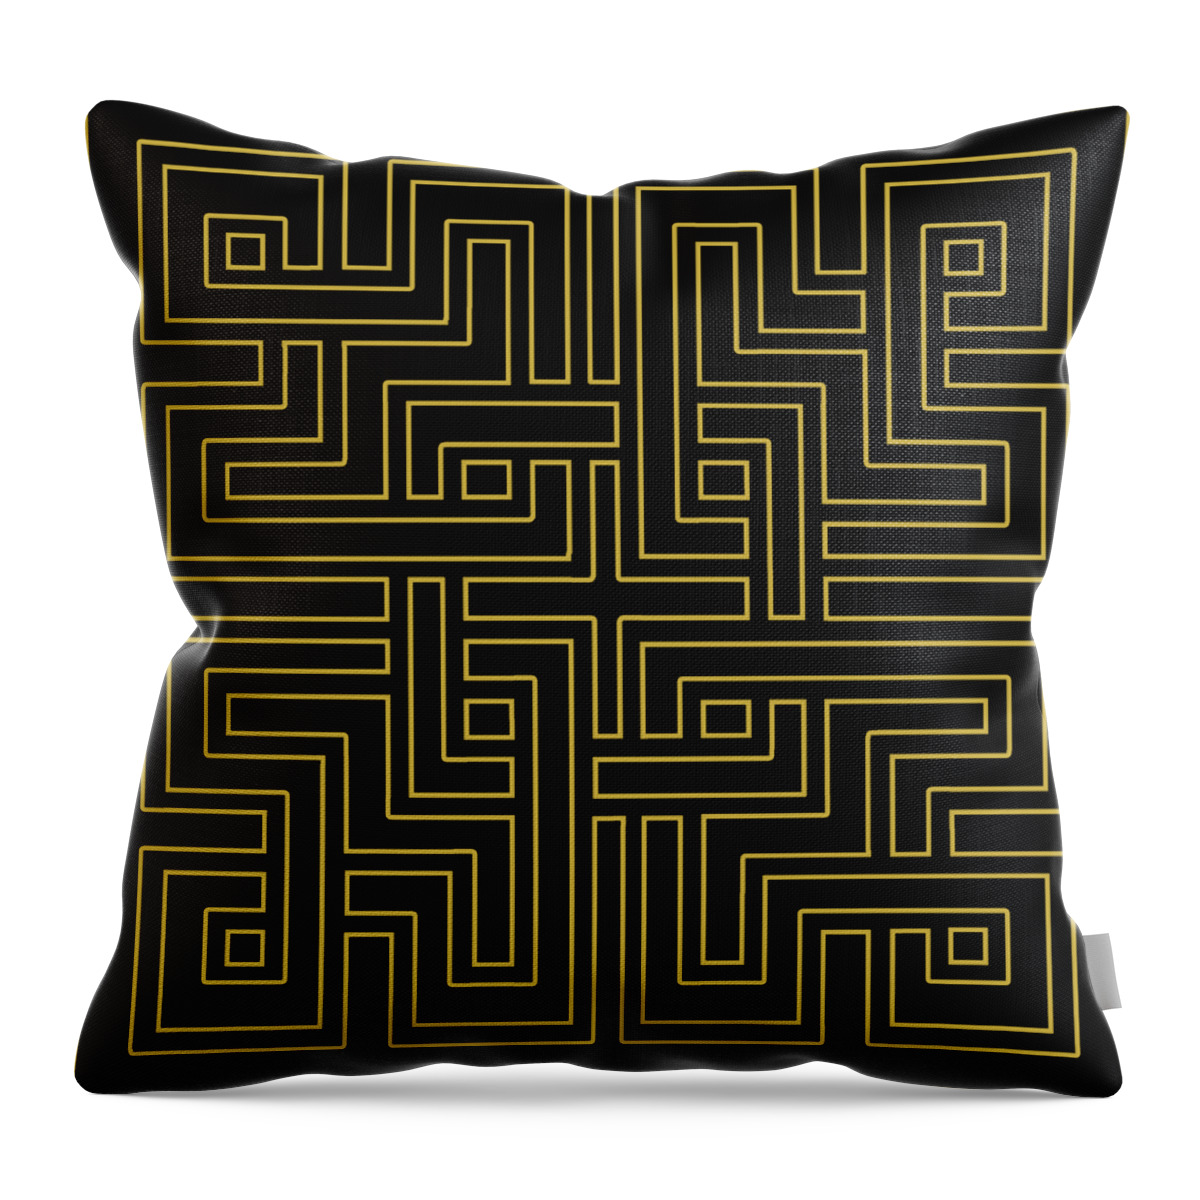 Geo Pattern 5 - Transparent Throw Pillow featuring the digital art Geo Pattern 5 - Transparent by Chuck Staley